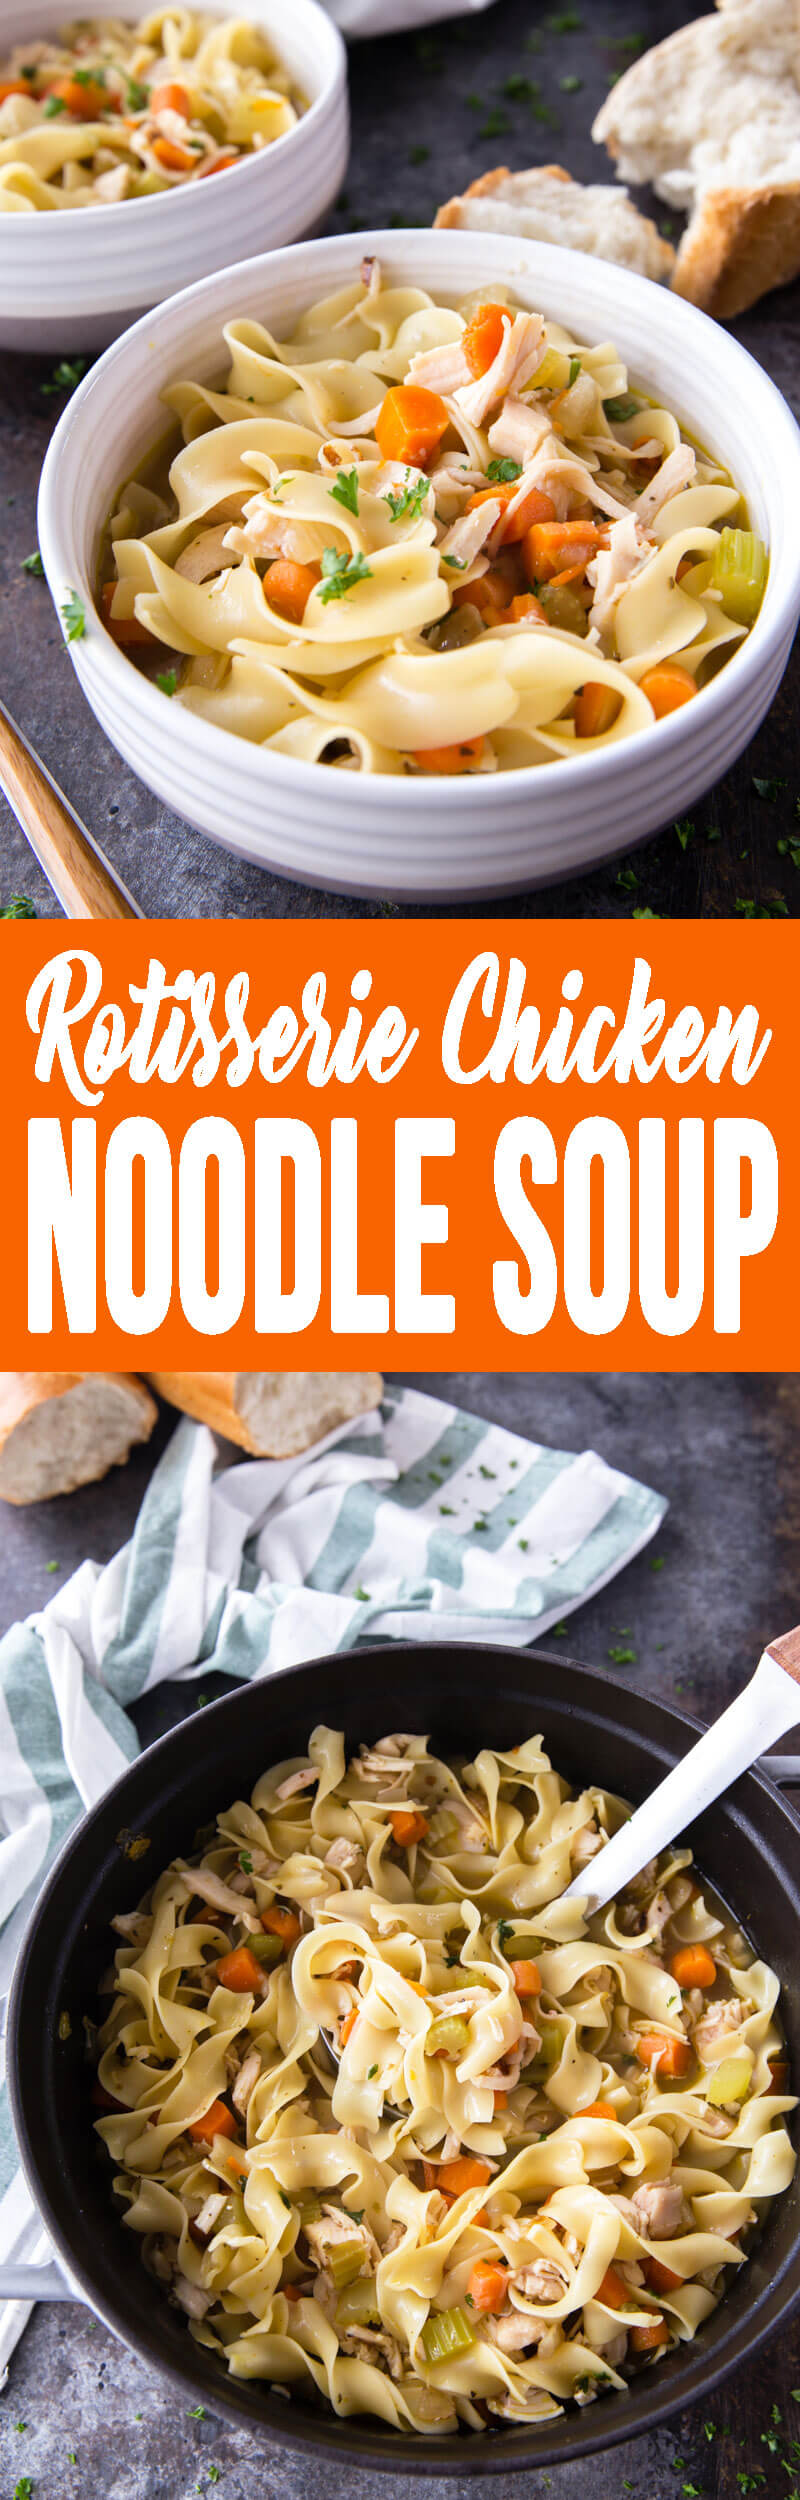 Delicious rotisserie chicken noodle soup is easy to make